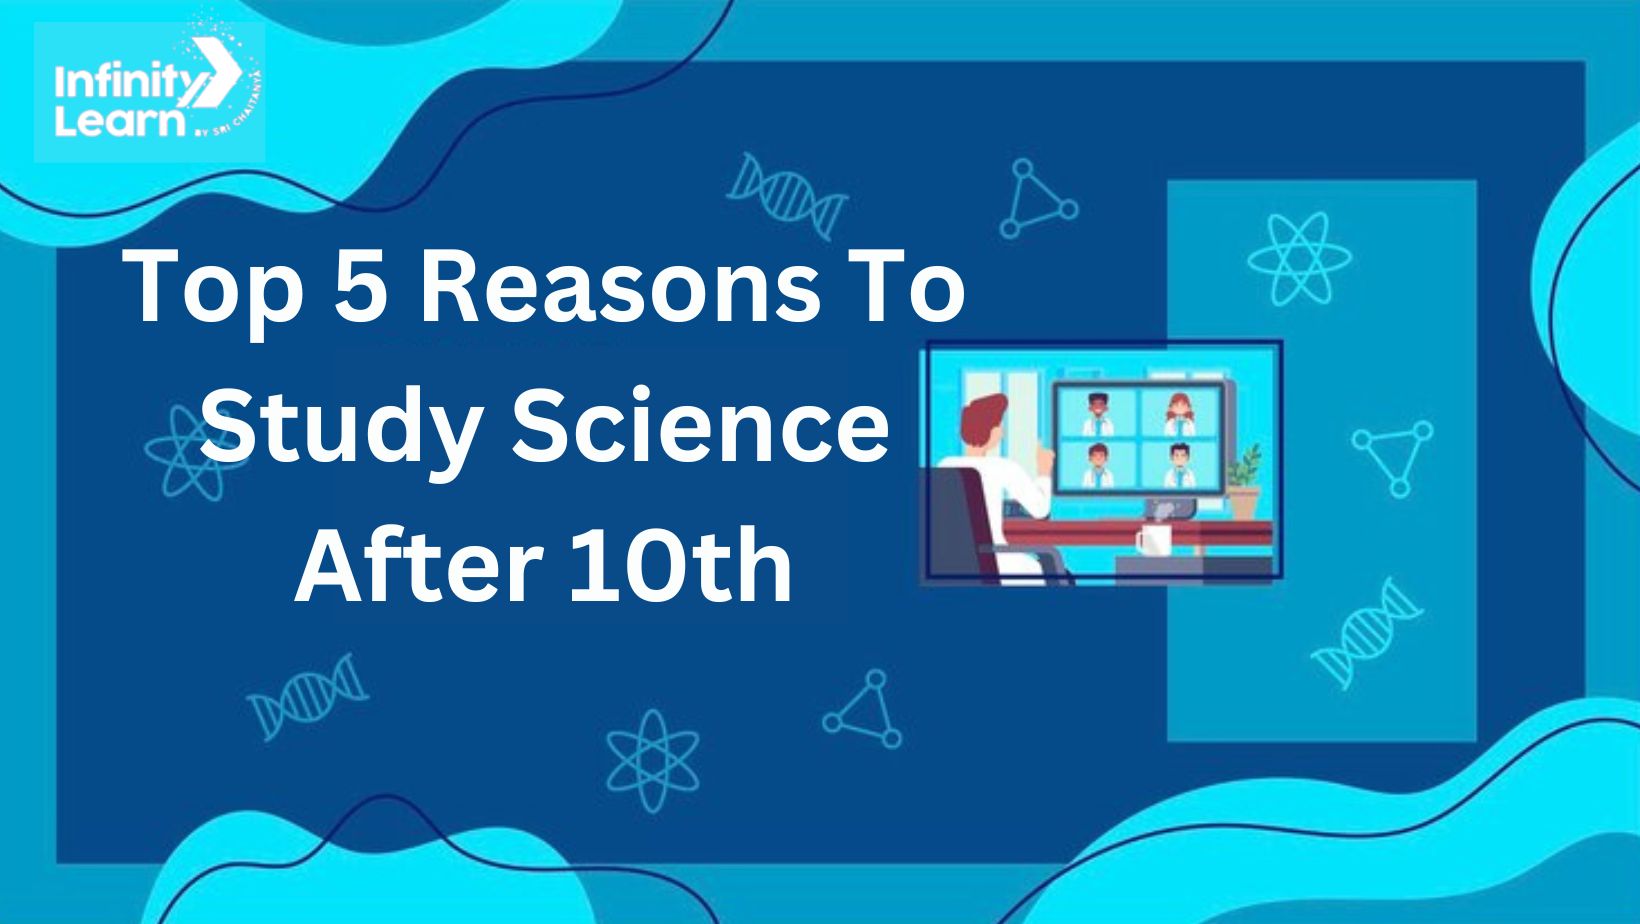 Top 5 Reasons To Study Science After 10th